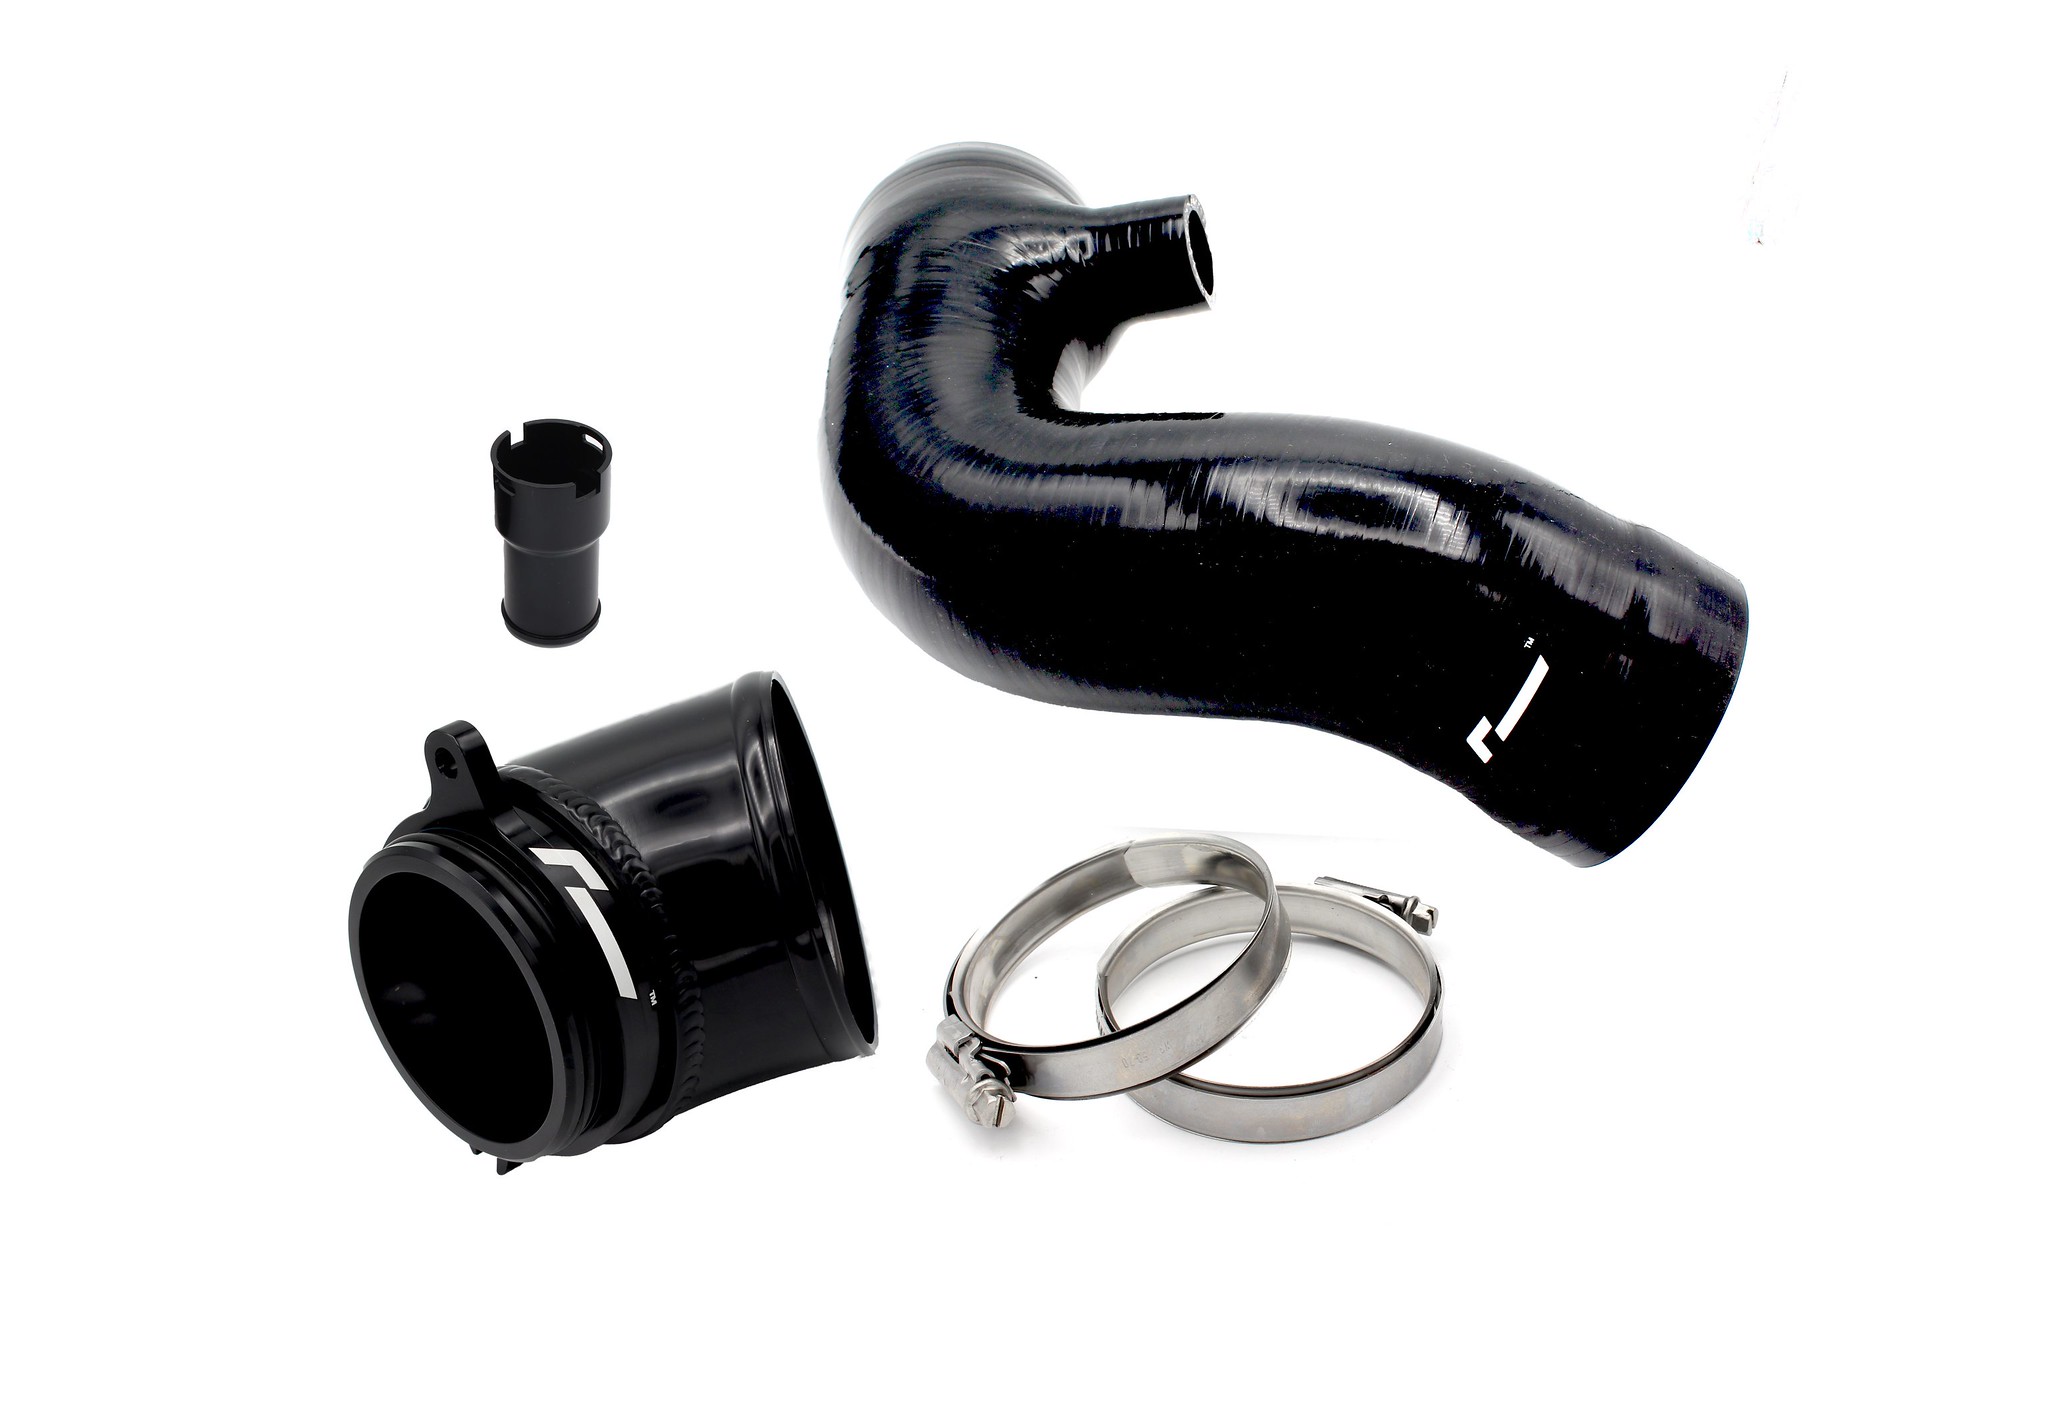 UNIFILTER FOAM FILTER CLEANING KIT – FOR USE WITH RACINGLINE/ITG FILTERS